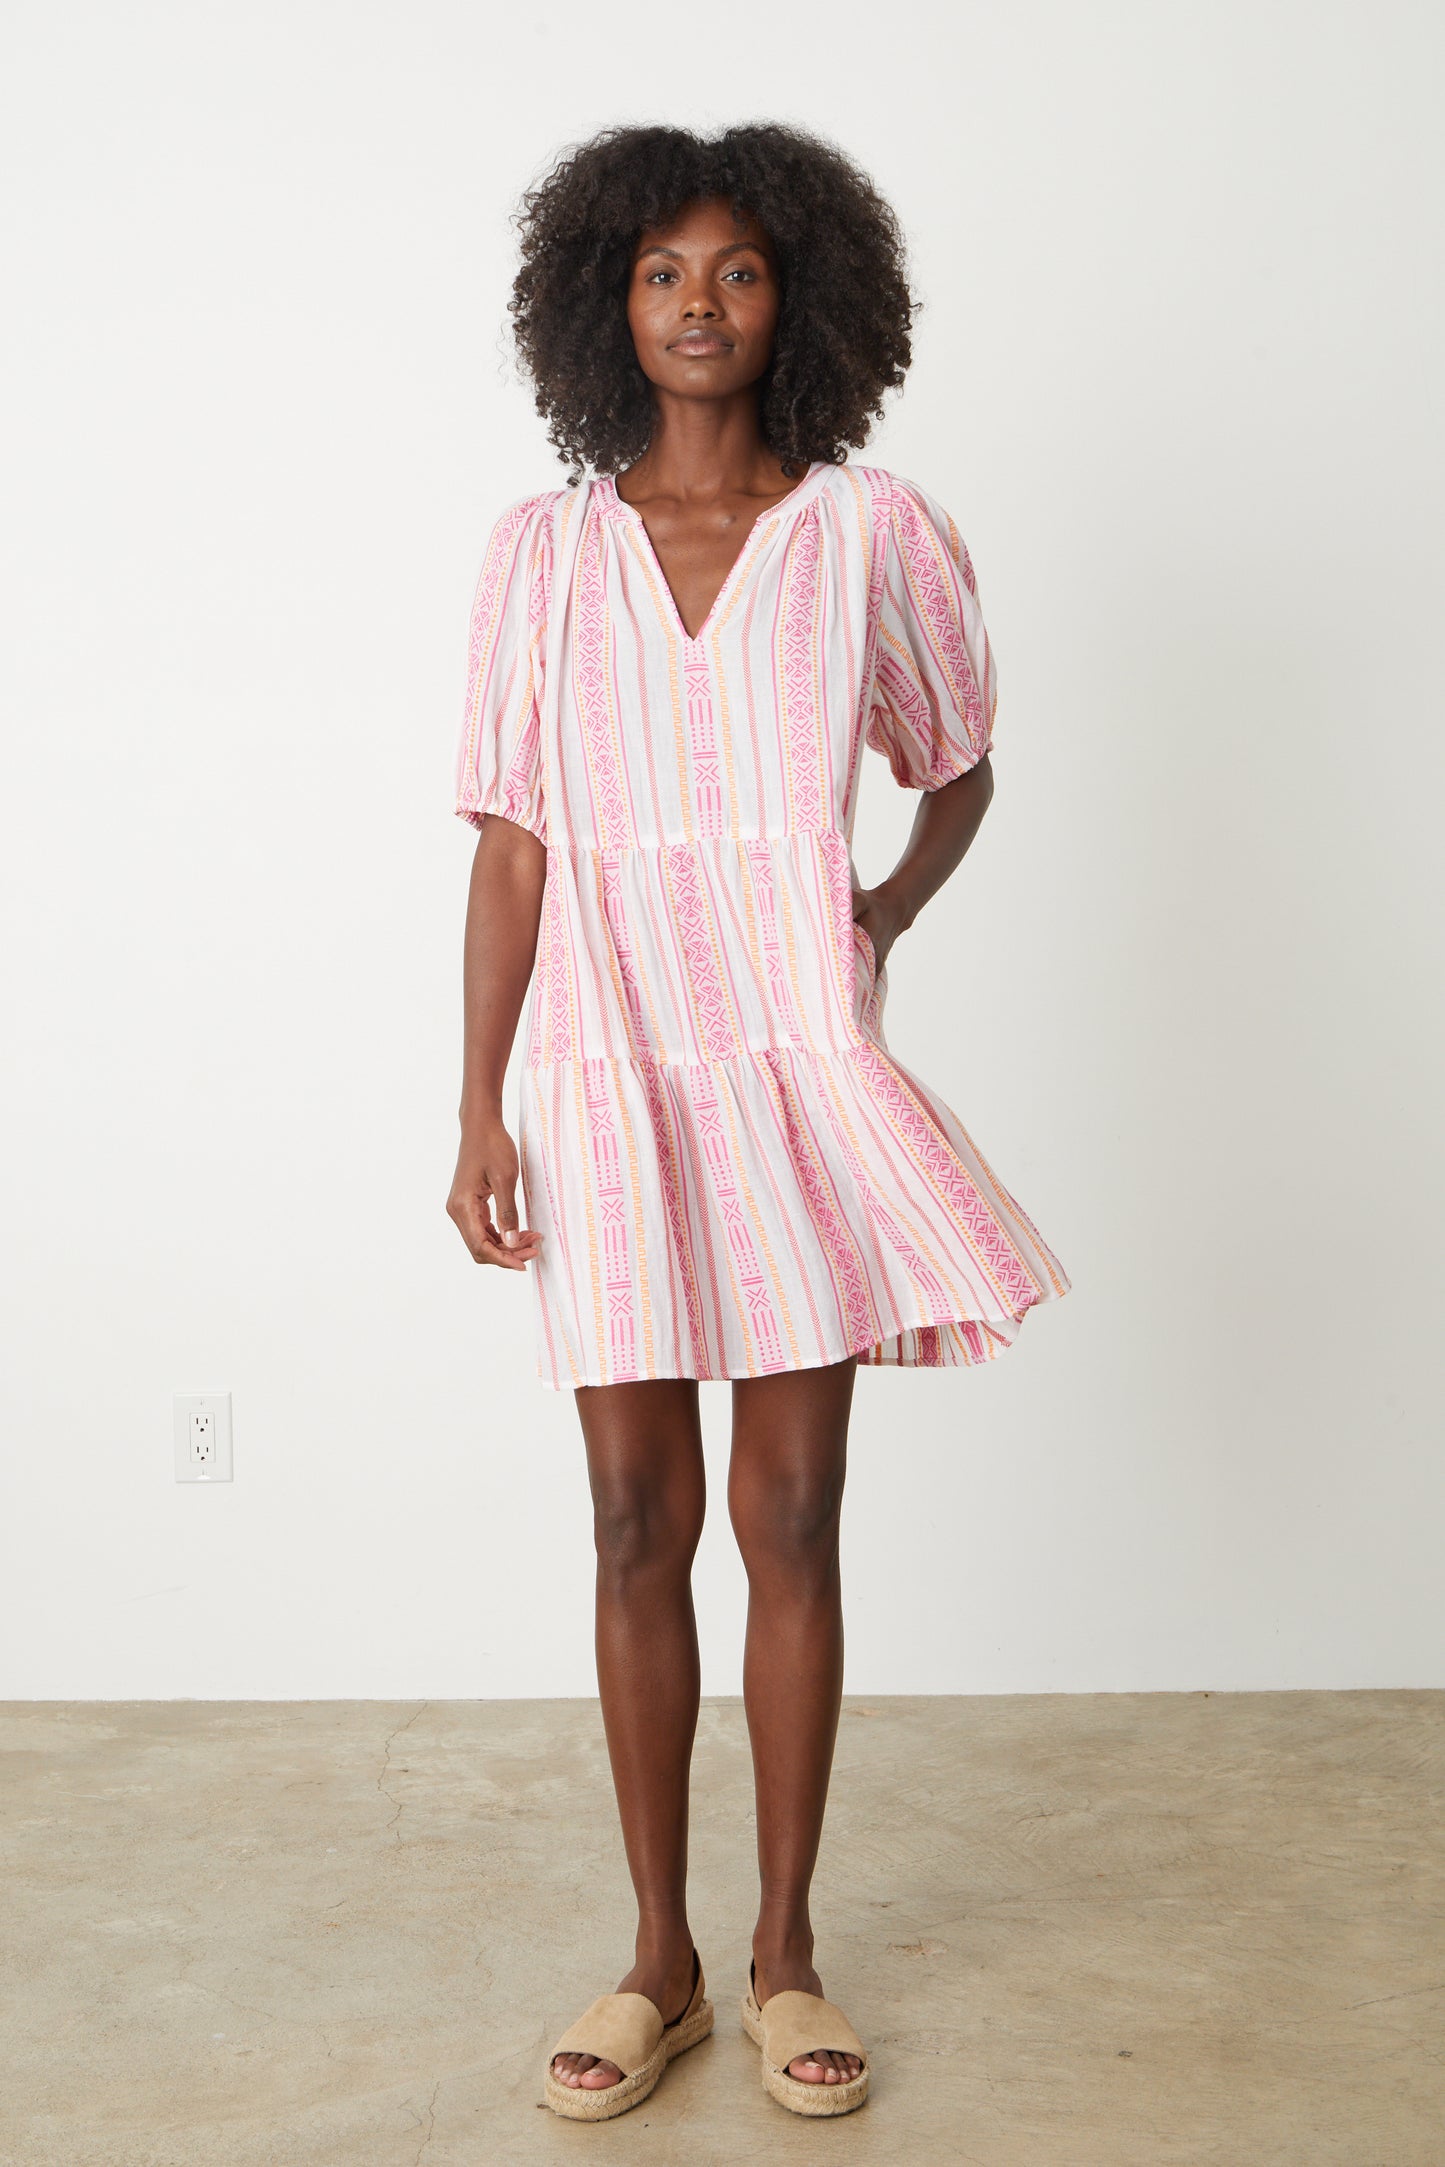 A woman wearing the MONIQUE JACQUARD BOHO DRESS by Velvet by Graham & Spencer, a pink and white striped jacquard print dress.-26577324474561